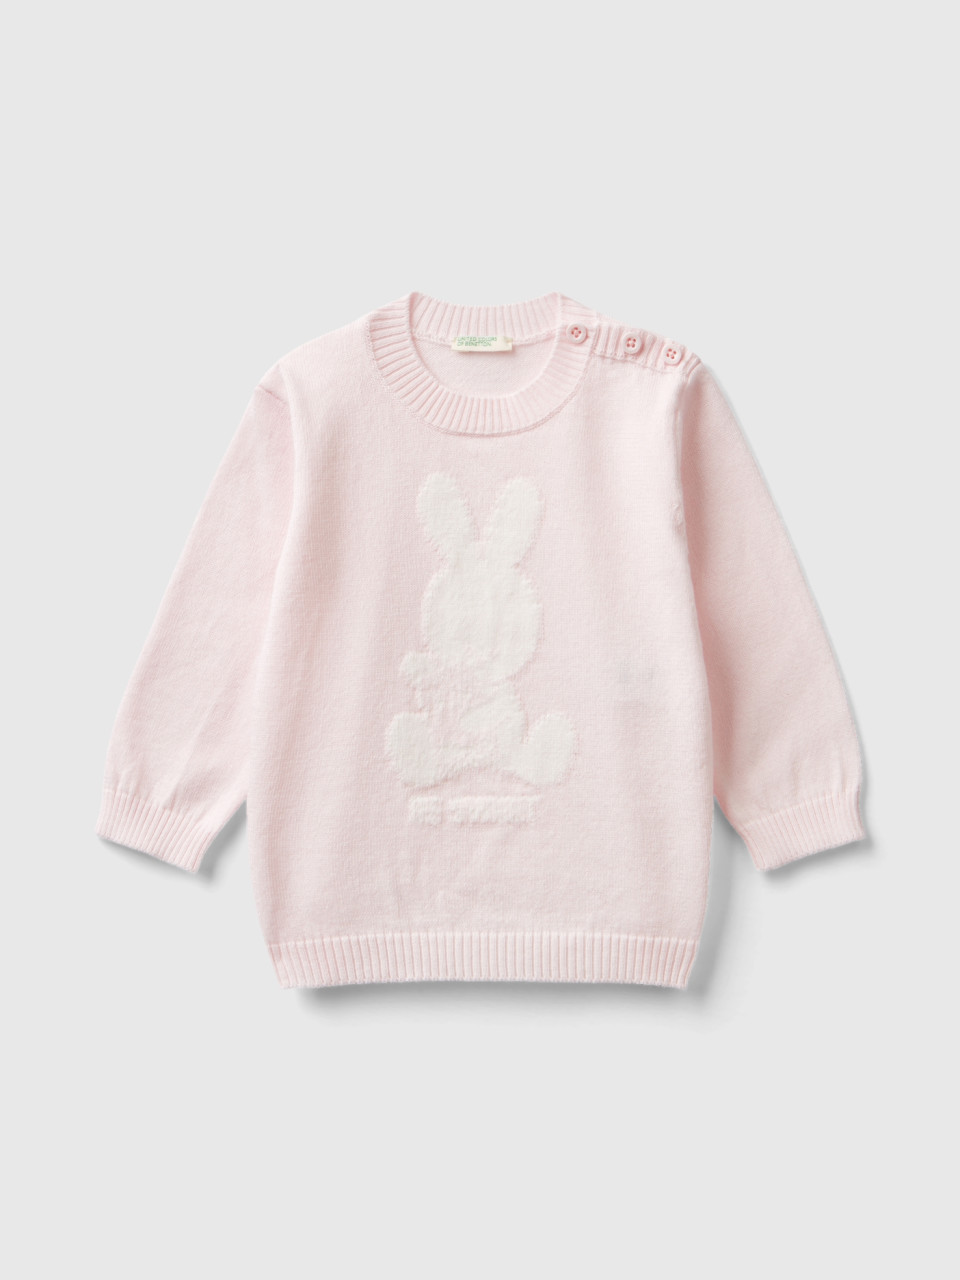 Benetton, Warm Cotton Sweater With Inlay, Soft Pink, Kids